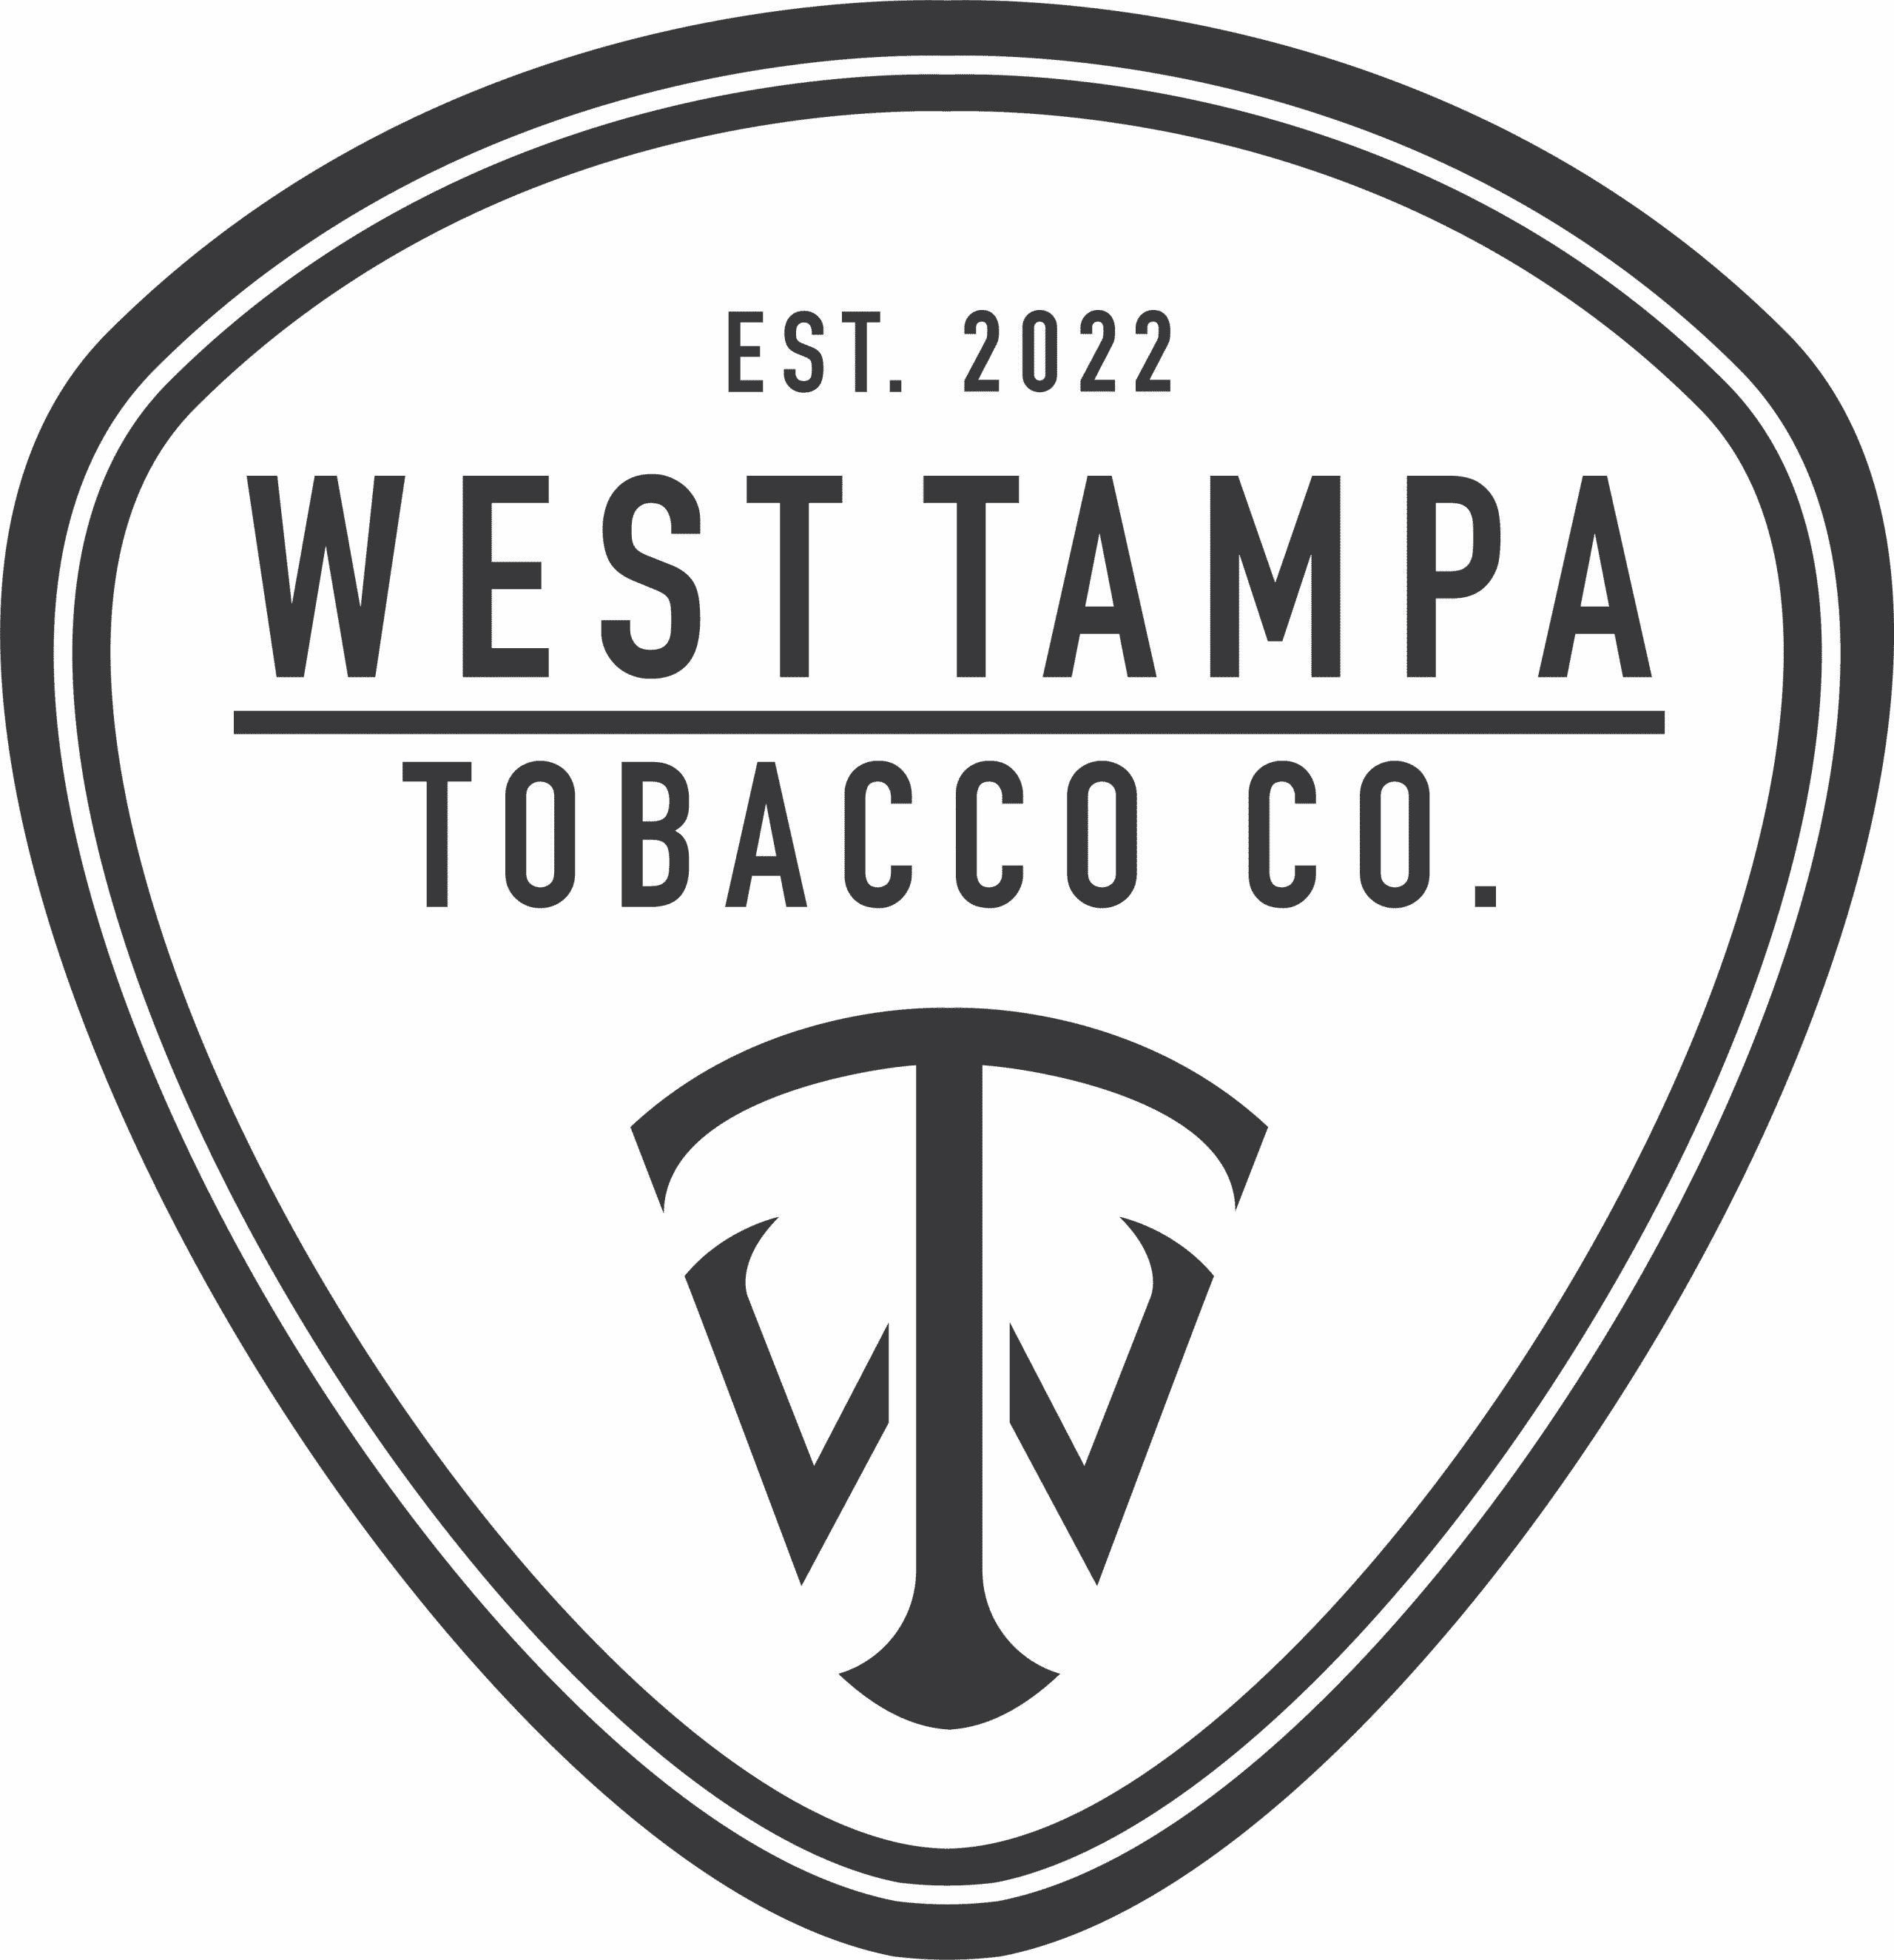 West Tampa Tobacco Company